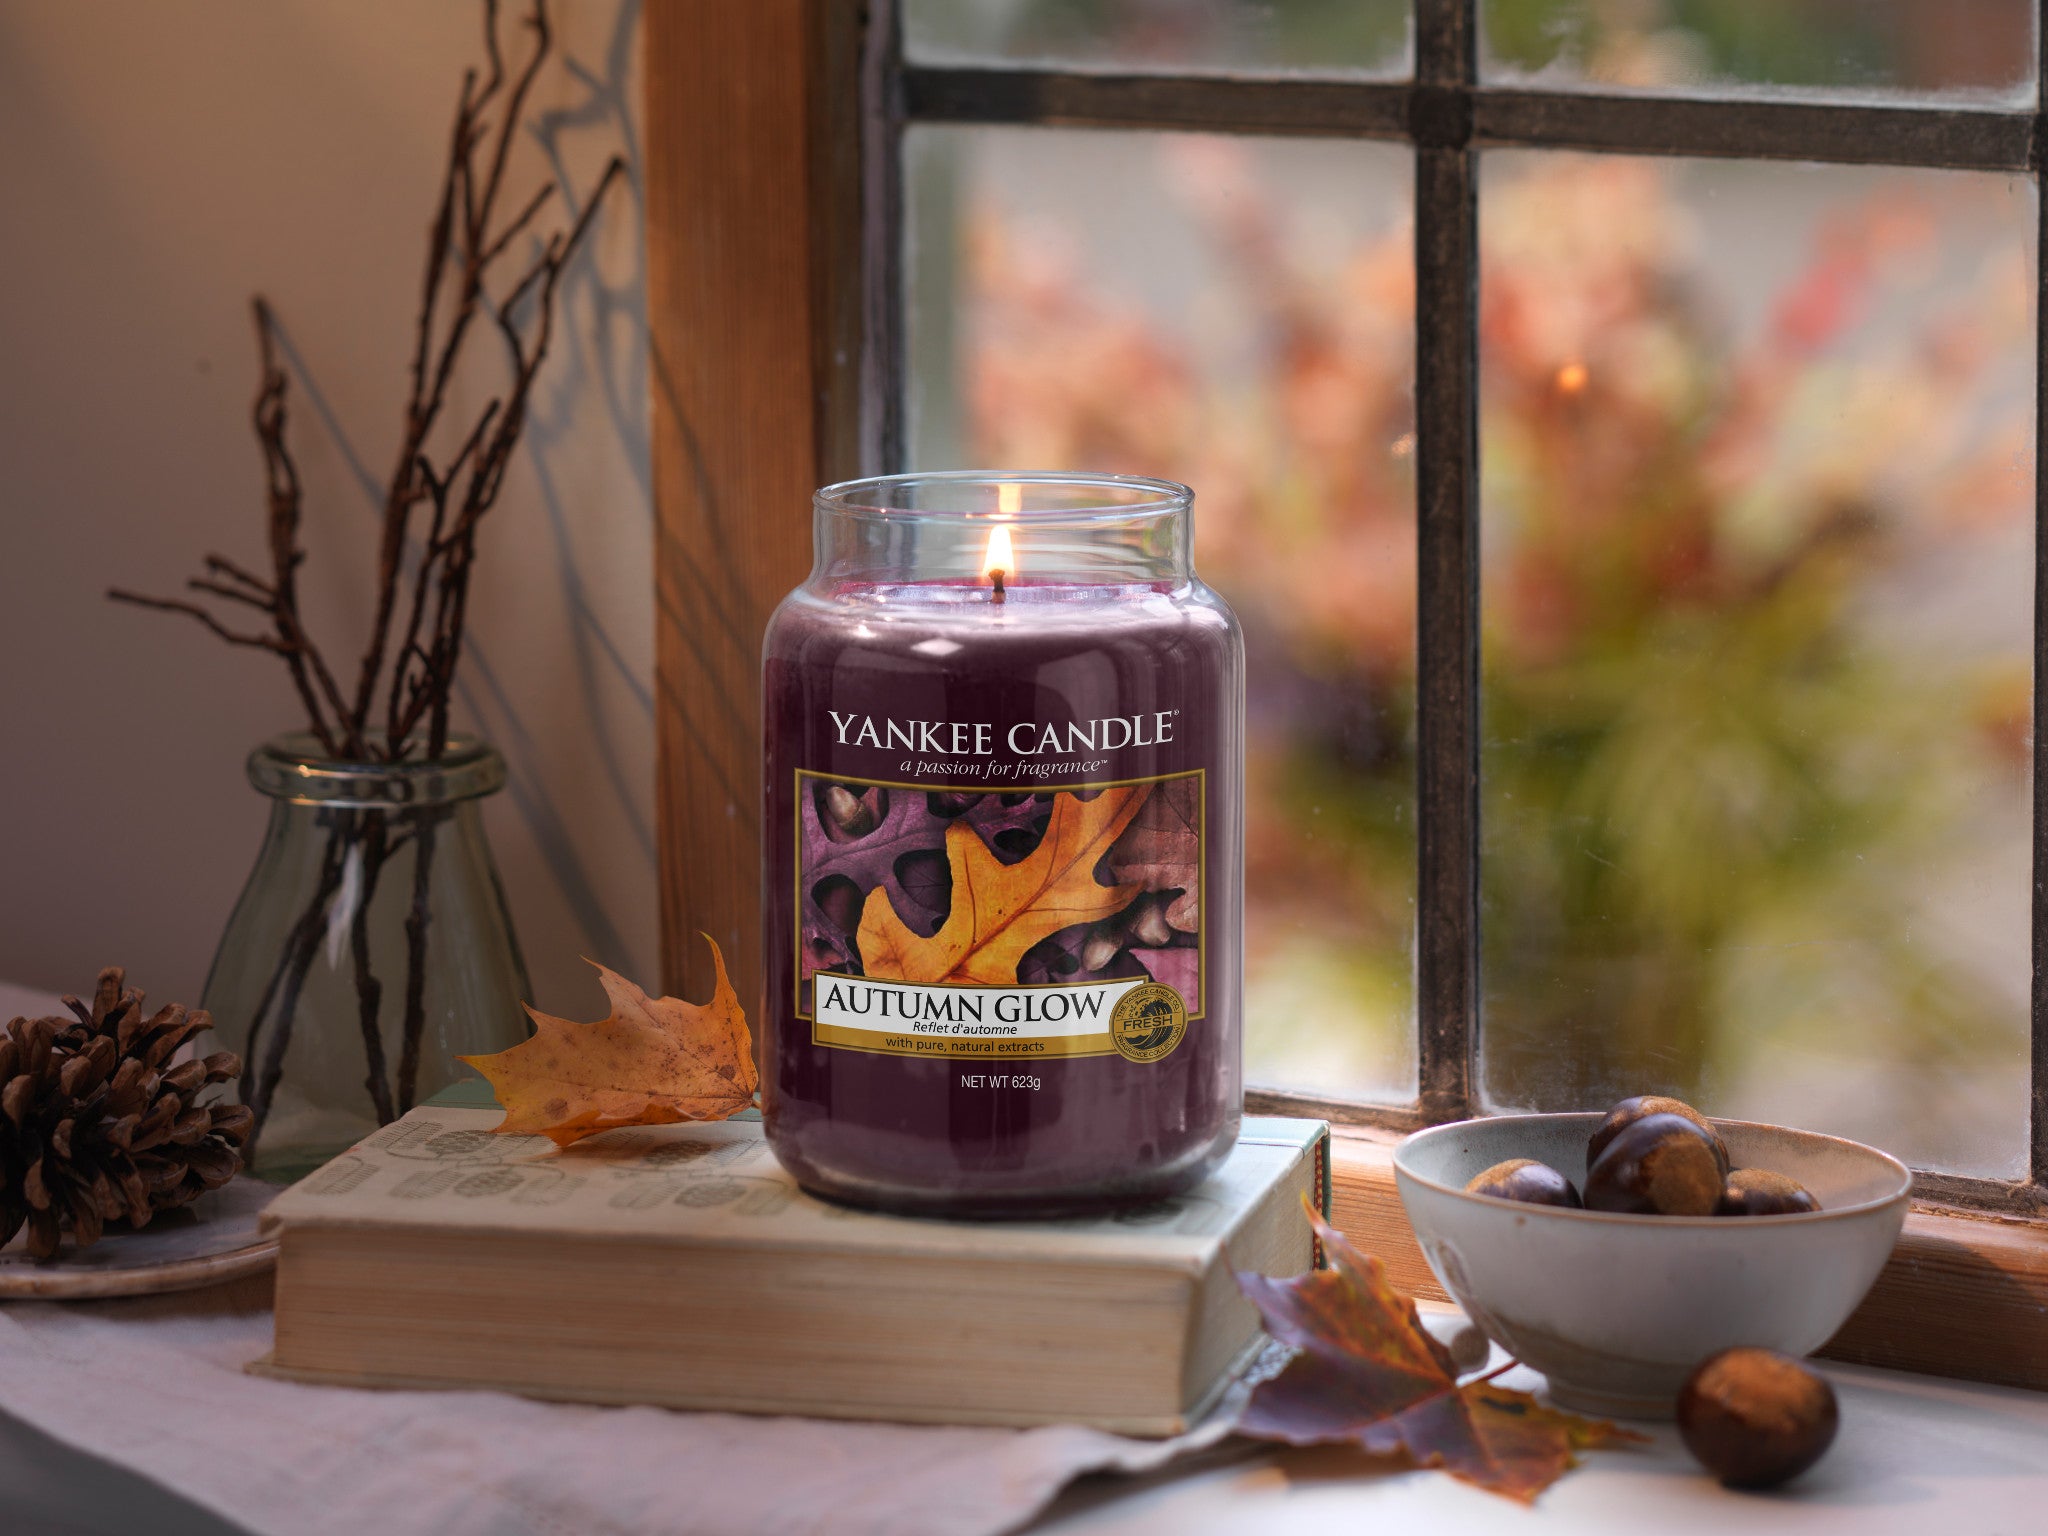 AUTUMN GLOW -Yankee Candle- Giara Piccola – Candle With Care